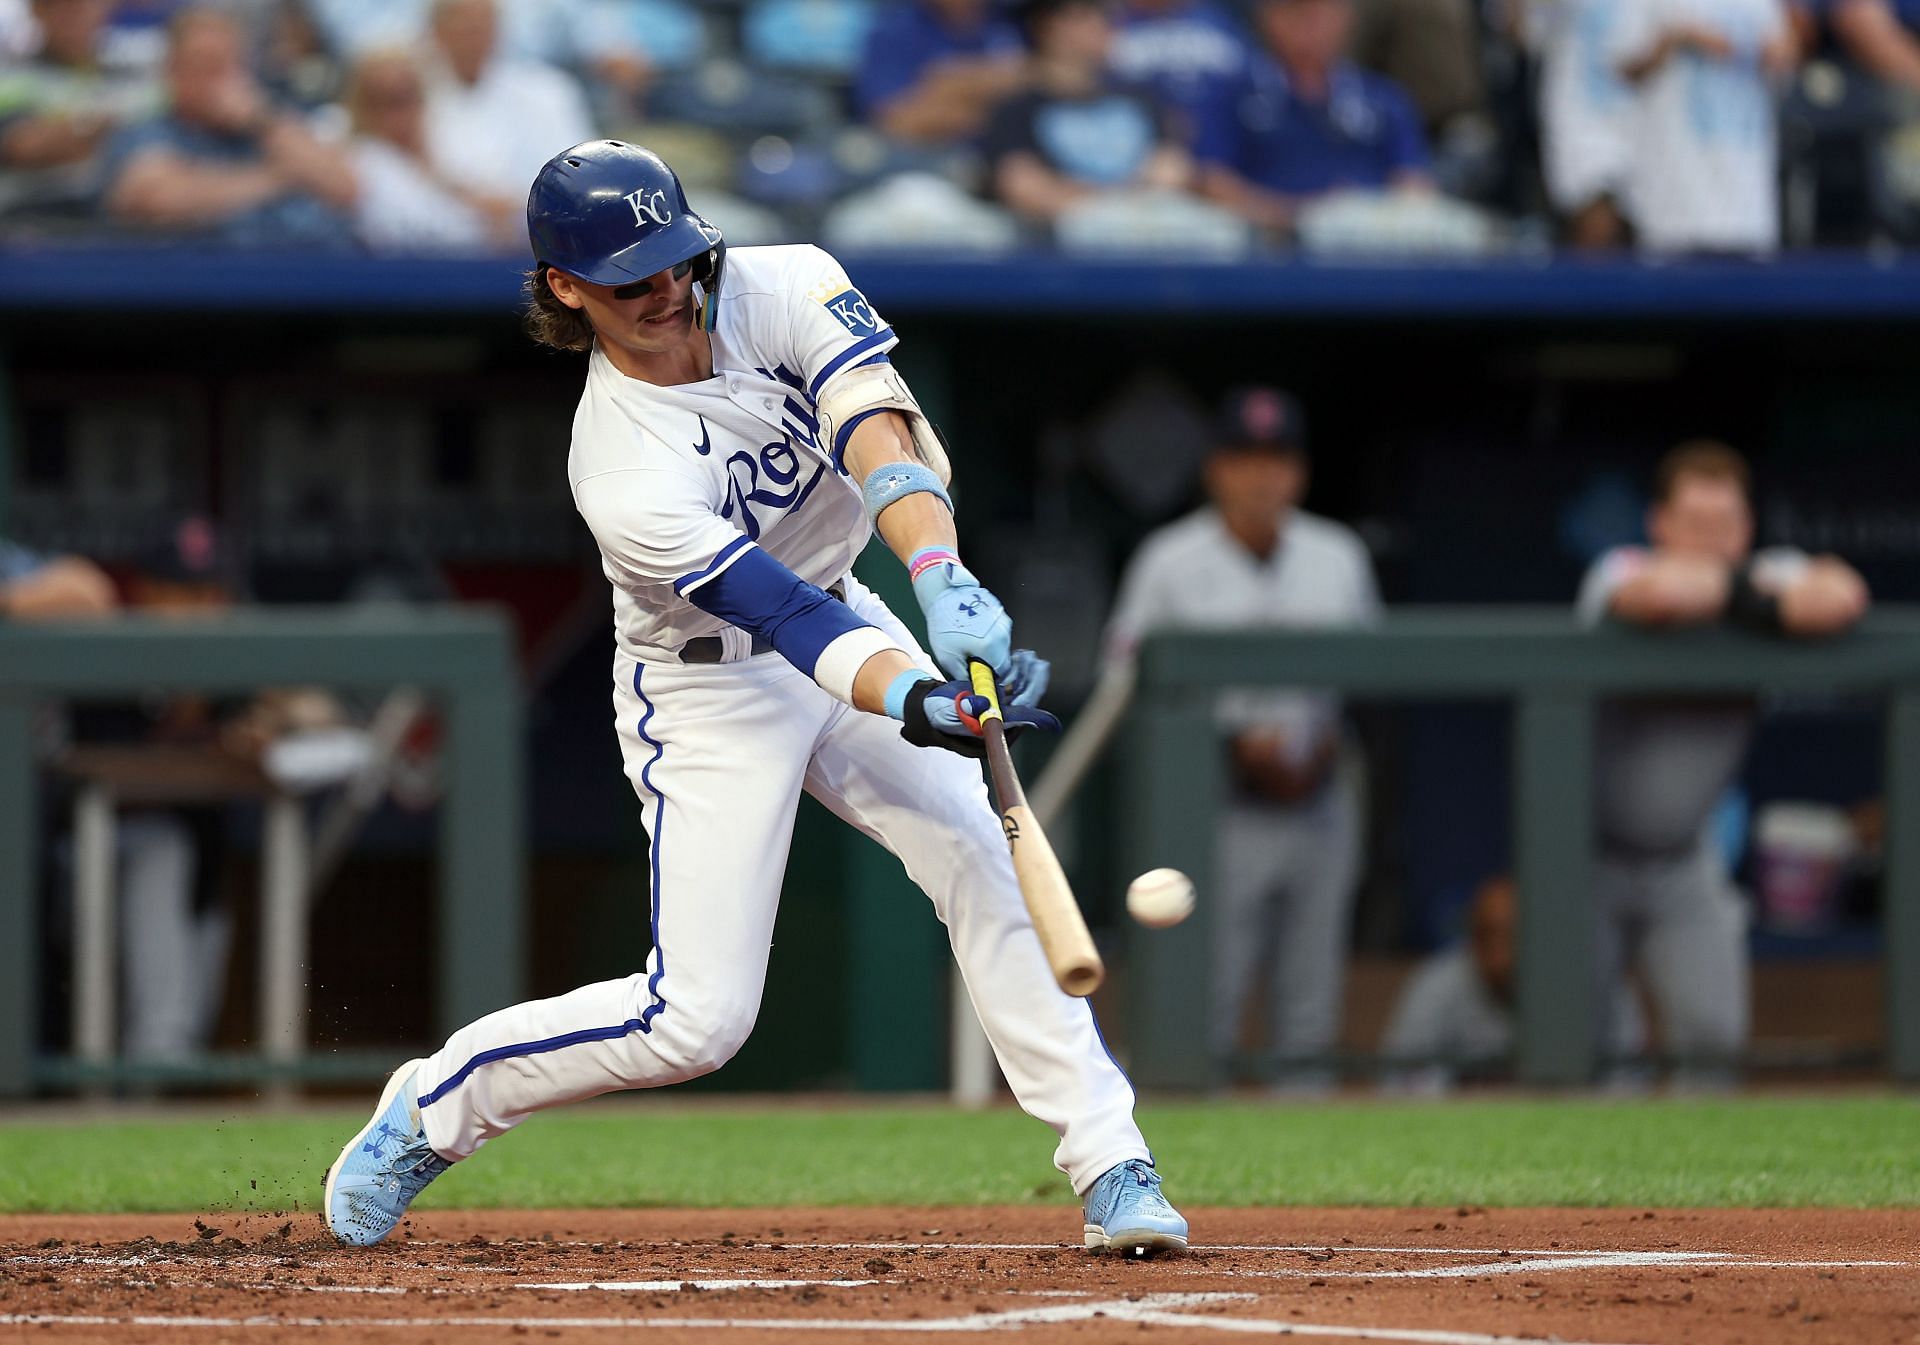 Bobby Witt Jr.’s contract with the Royals ranks second in guarantees for a pre-arbitration player, behind Fernando Tatis Jr.